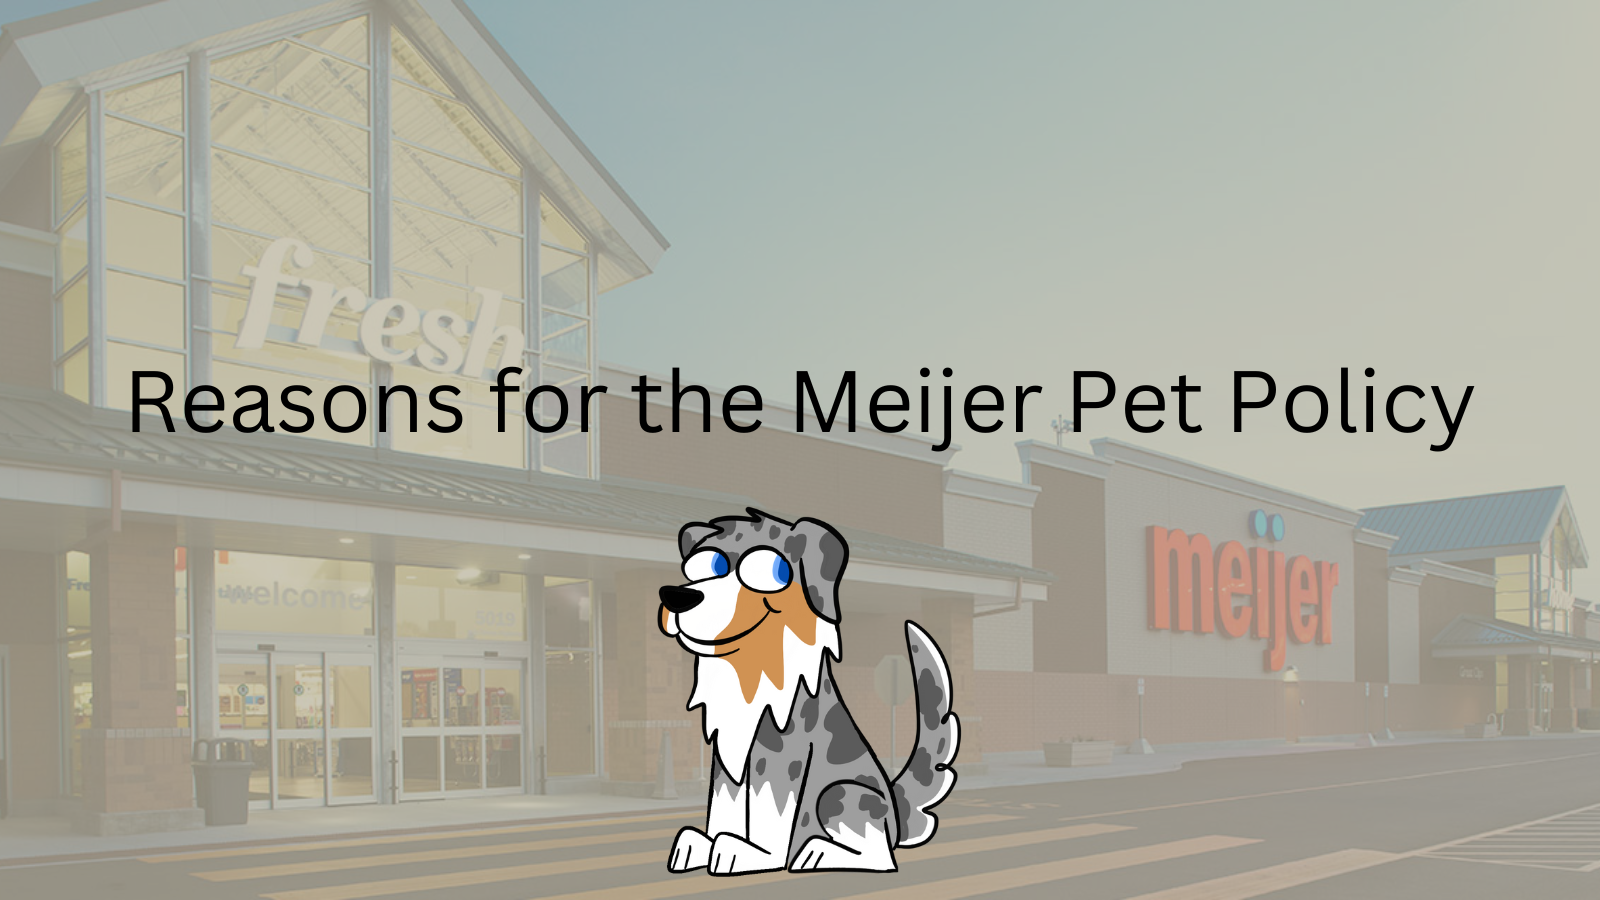 Image Text: "Reasons for the Meijer Pet Policy"